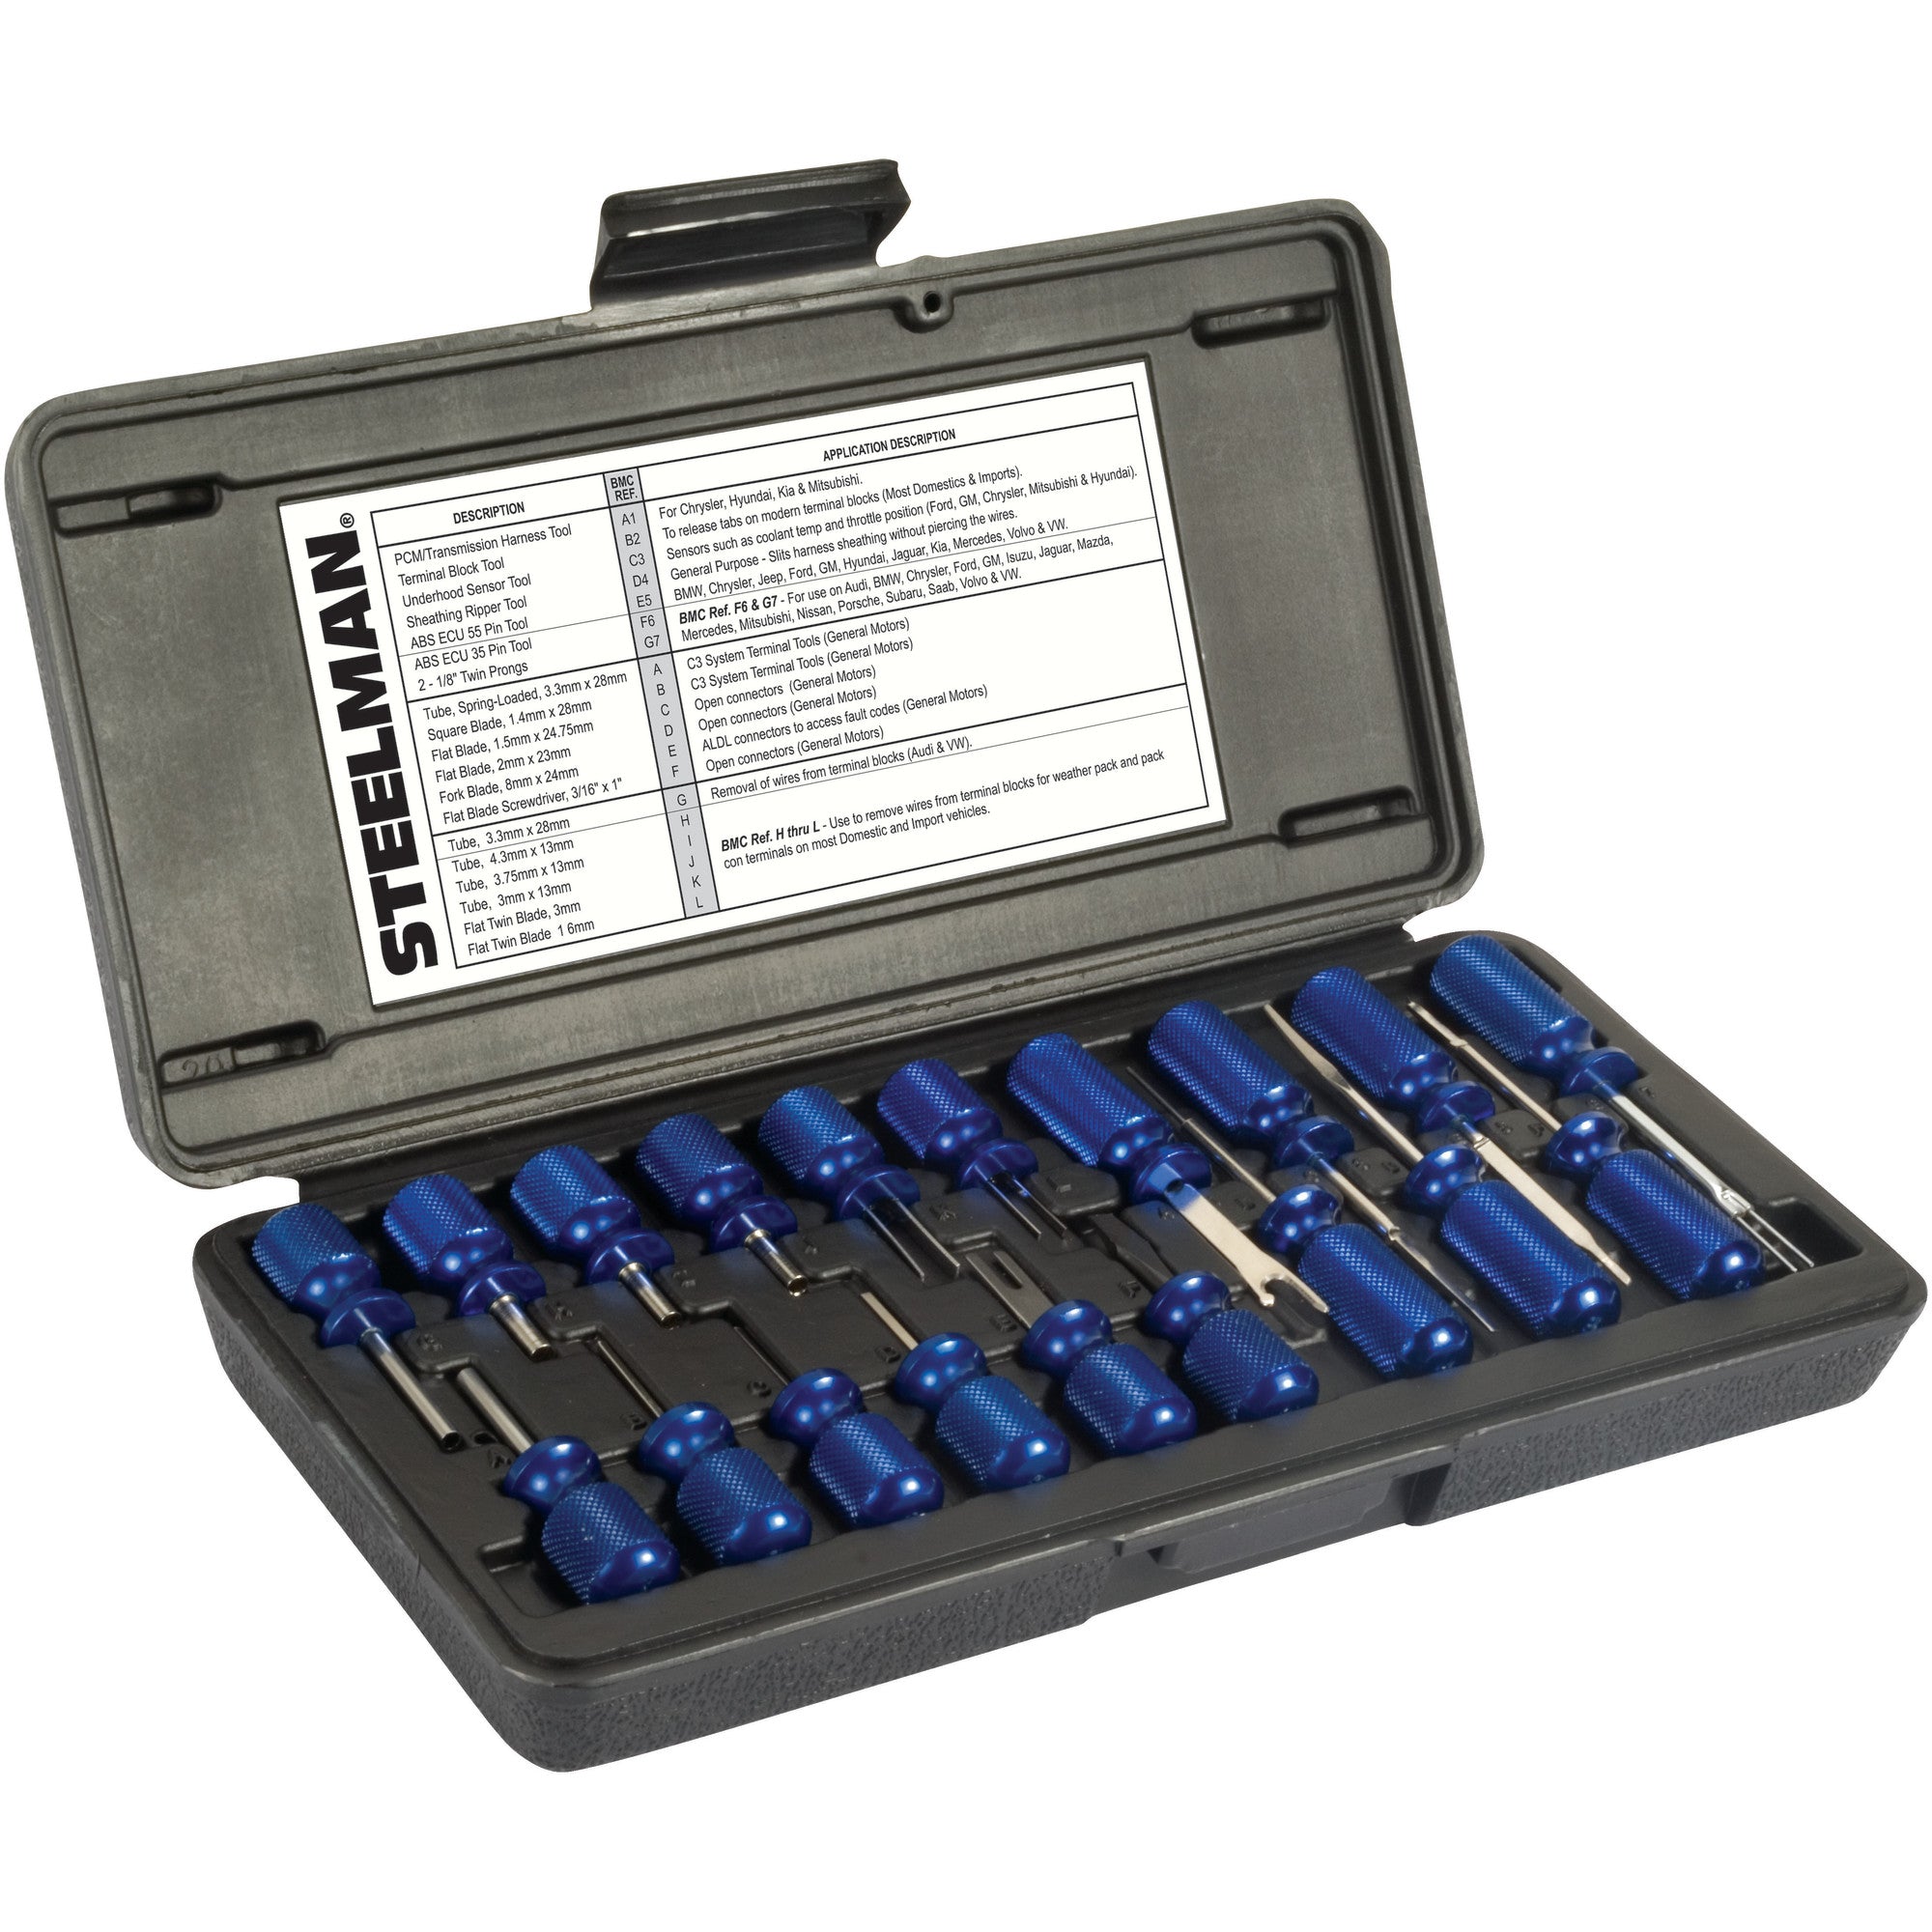 Powerbuilt Master Terminal Tool Kit, 19 Piece, Release and Remove from  Electrical Connectors, Prevent Damage to Sensors, Wire Harnesses - 641448